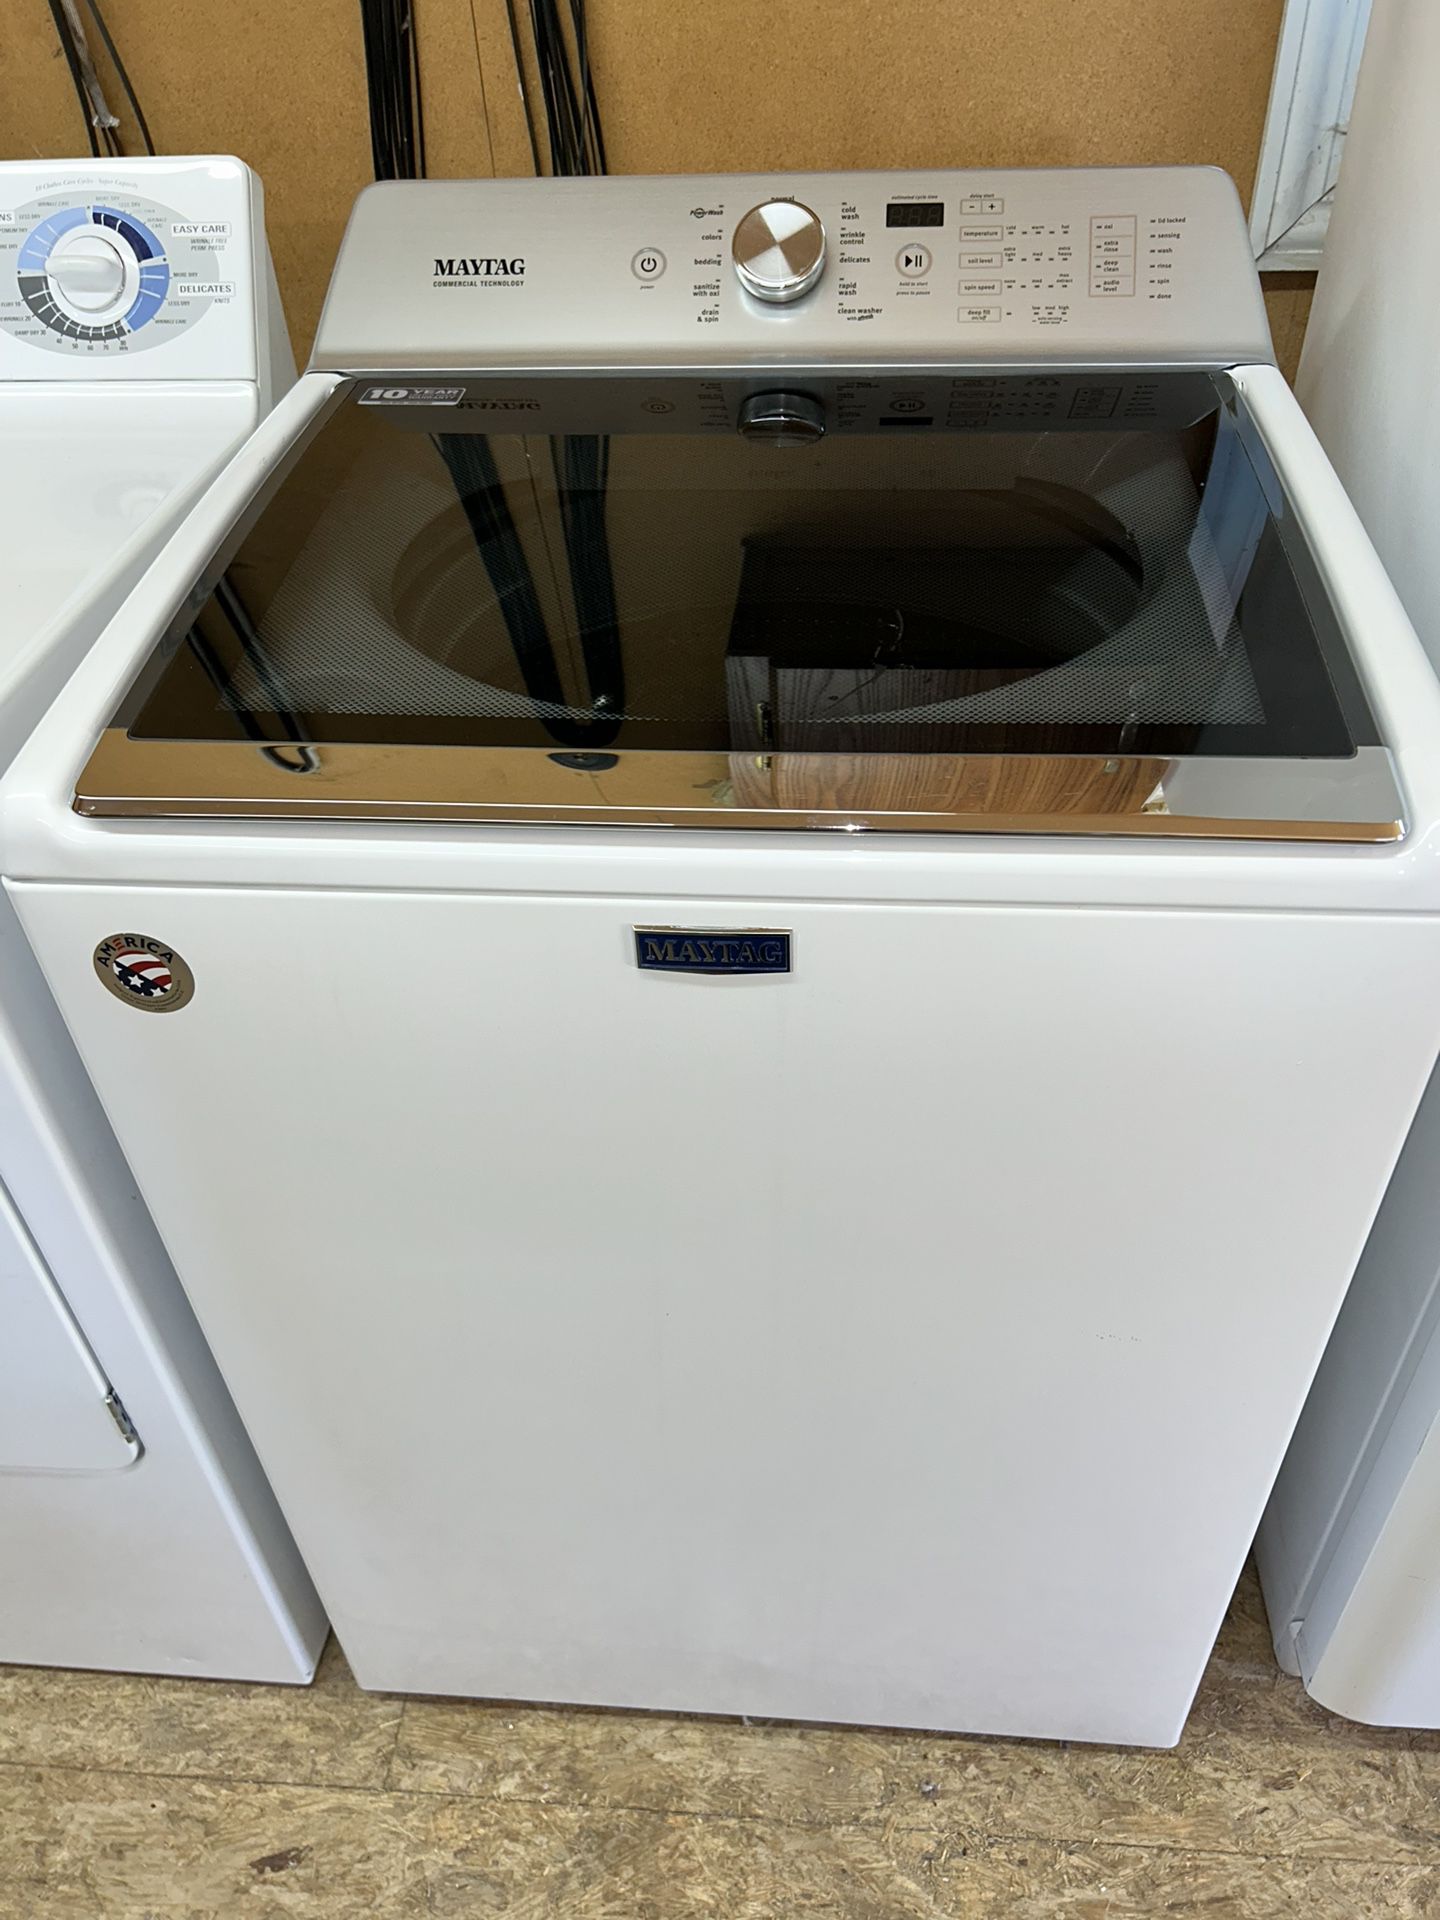 Late Model Maytag Commercial Technology Top Load Washer